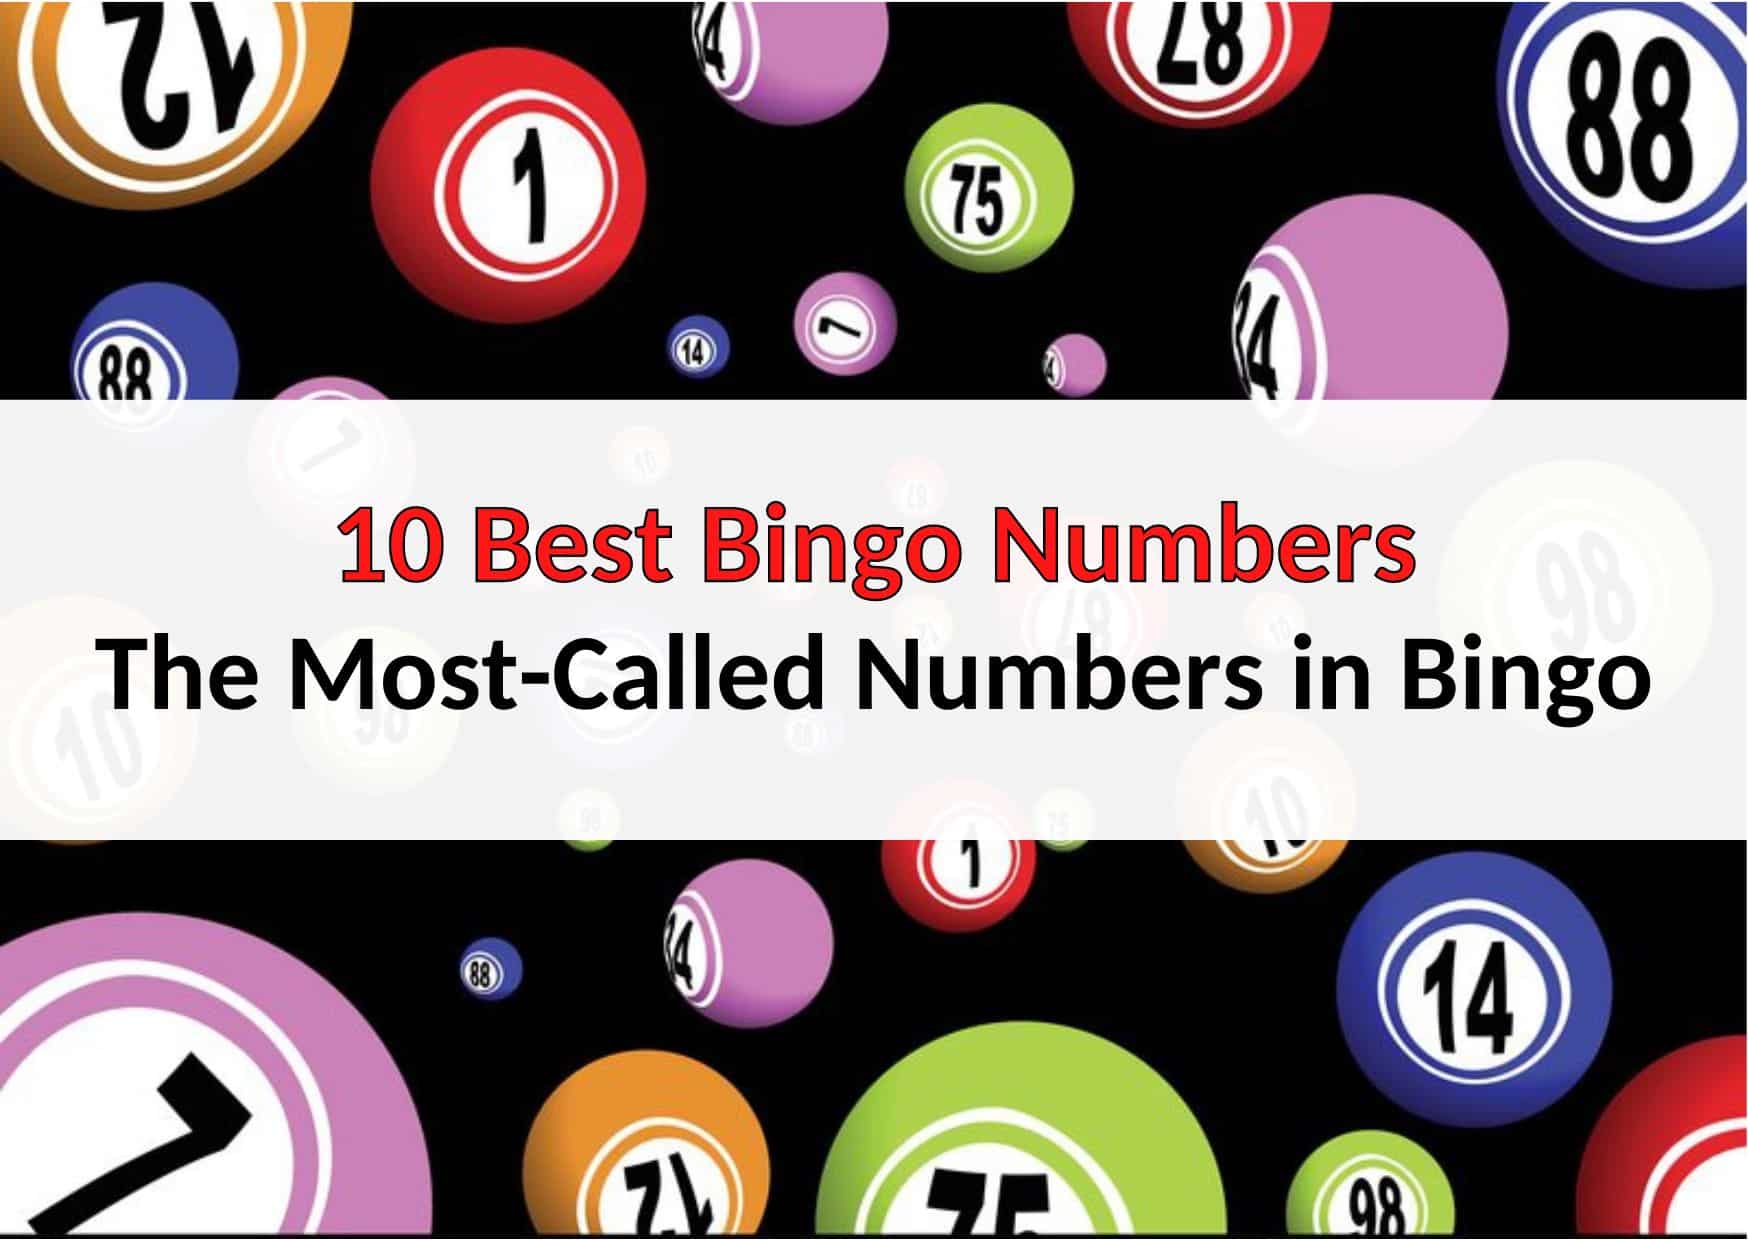 What Are The Most Called Bingo Numbers